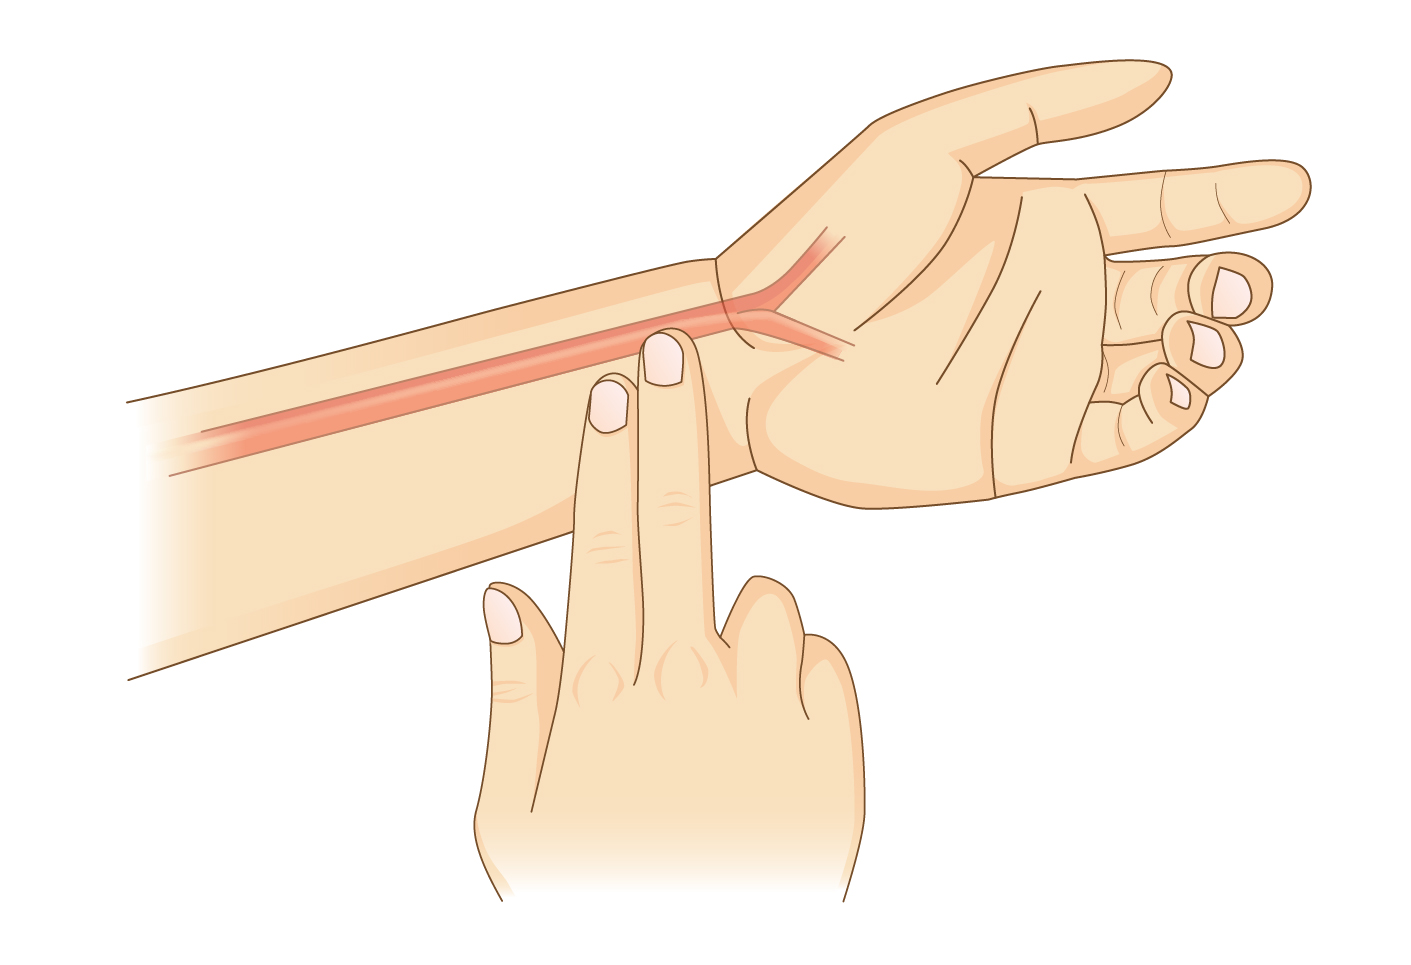 Illustration on hoe to check your heart rate manually with two fingers on your wrist.